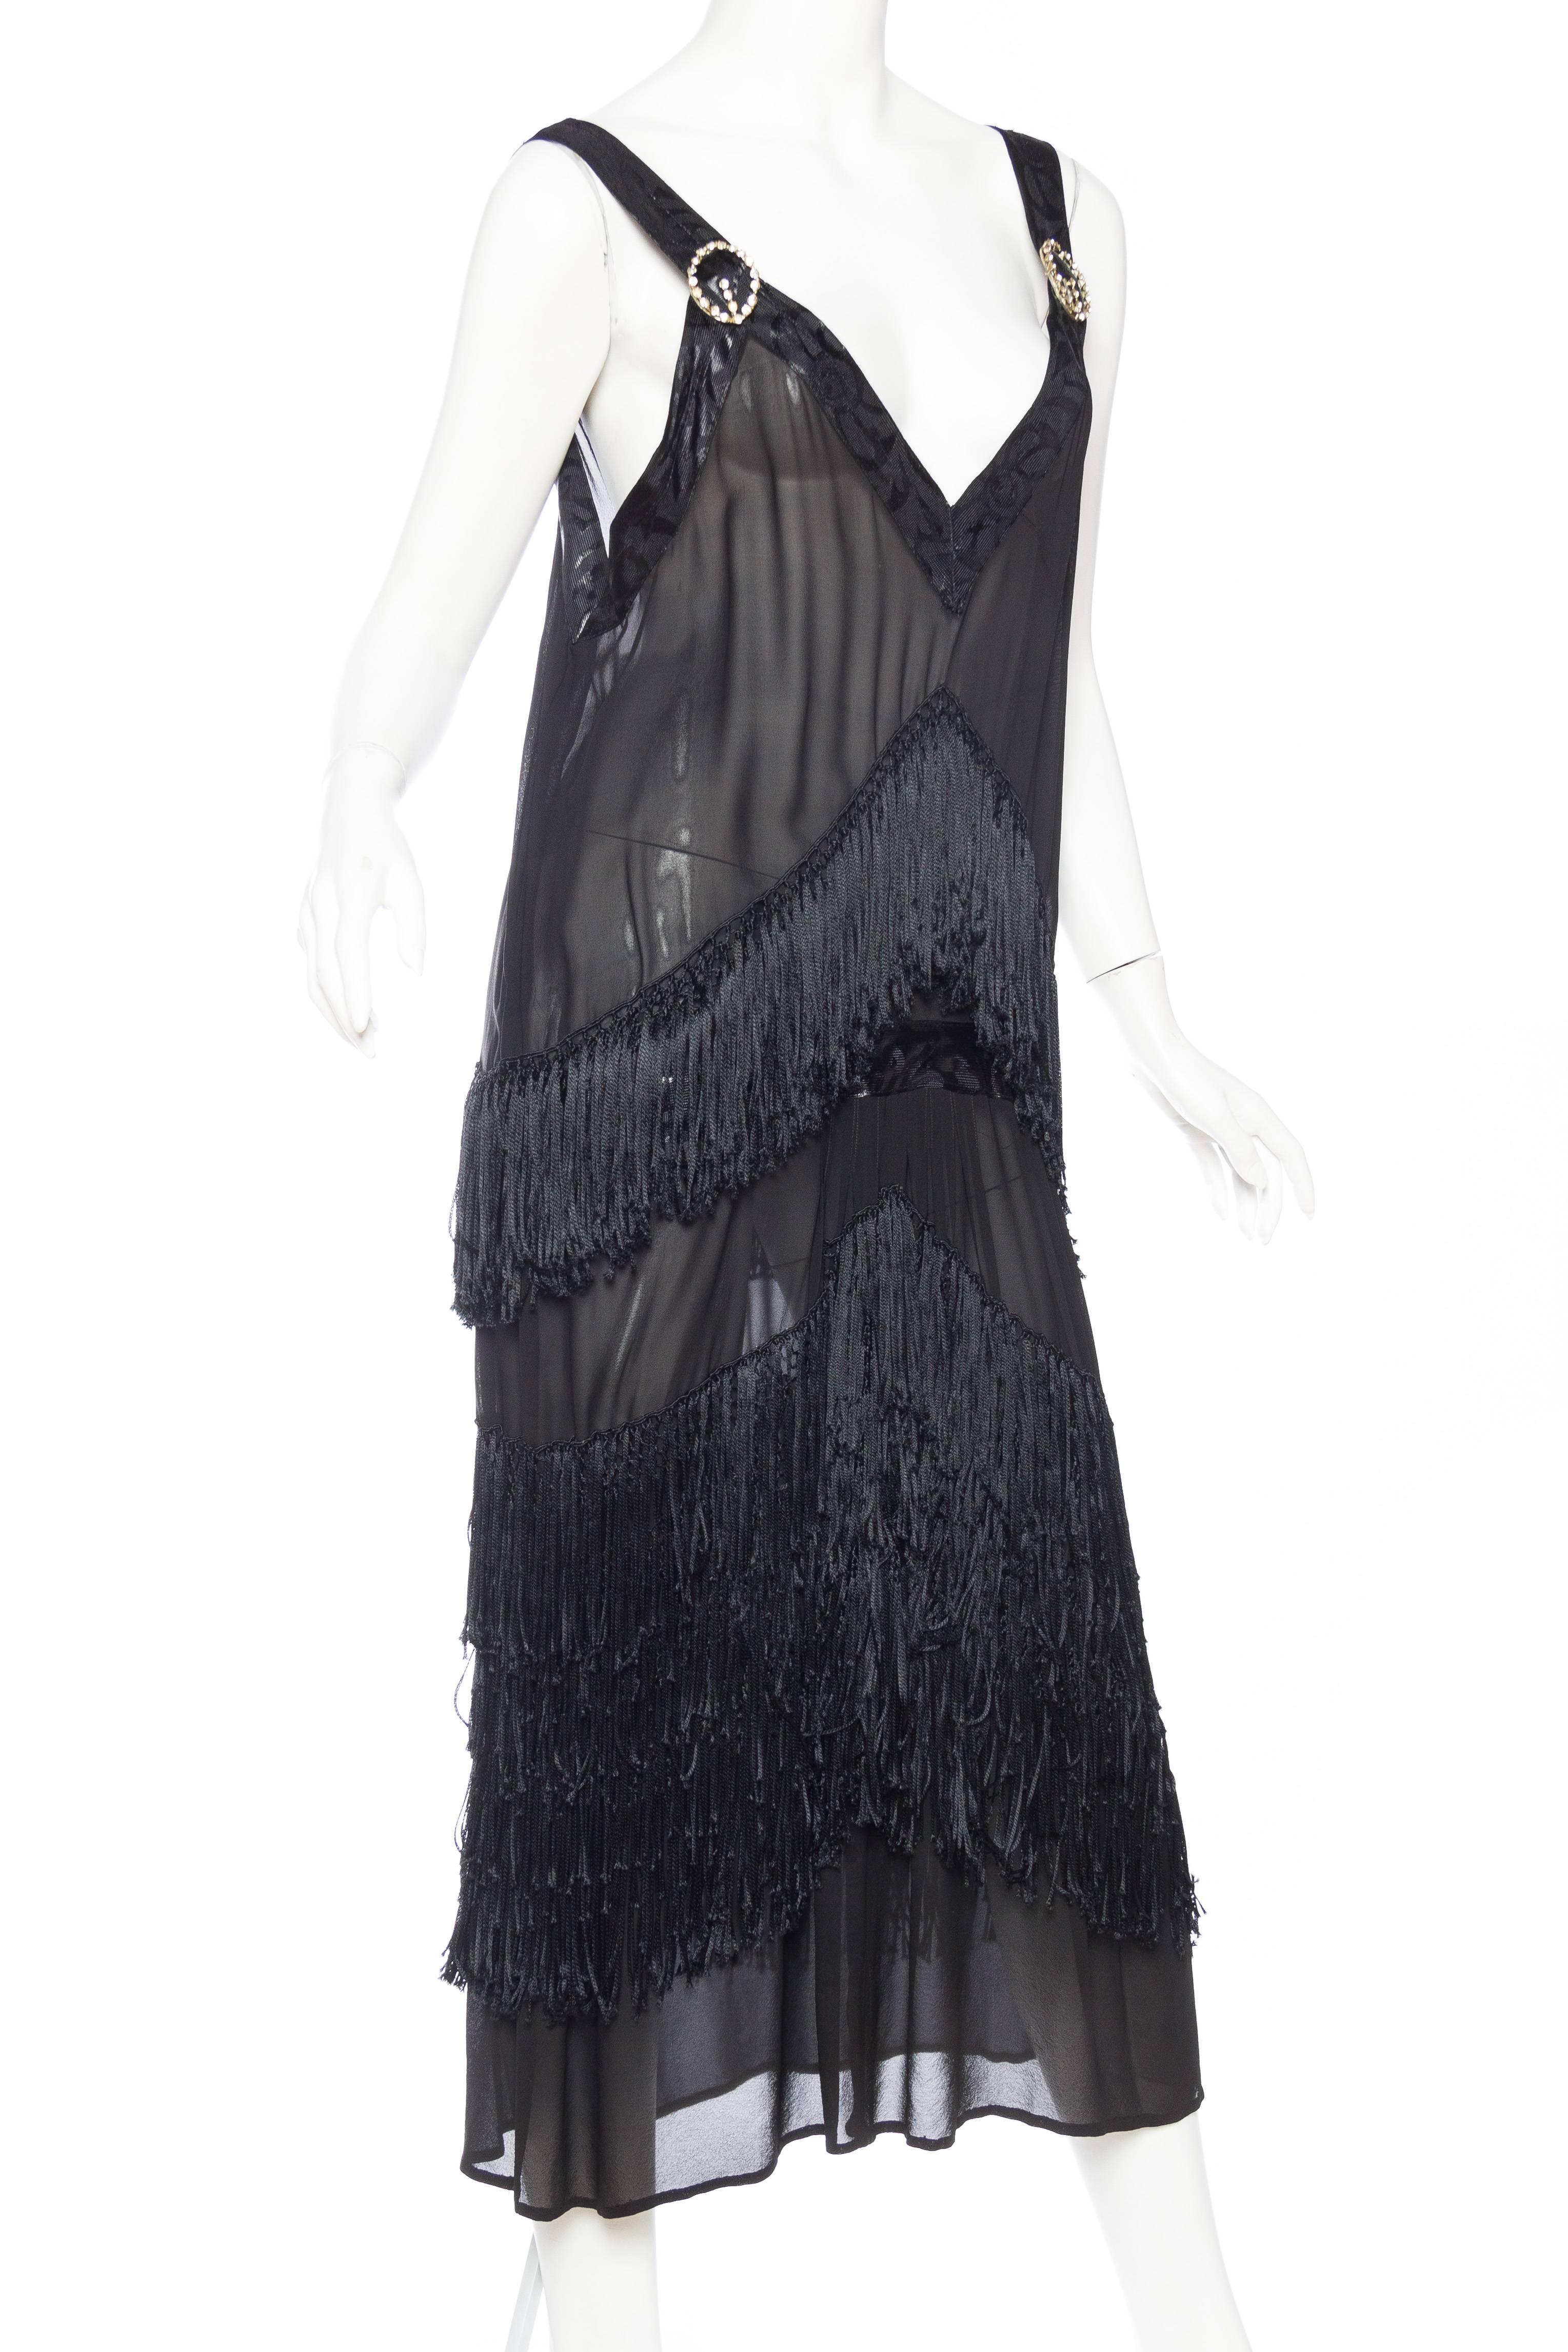 1920s nightgown